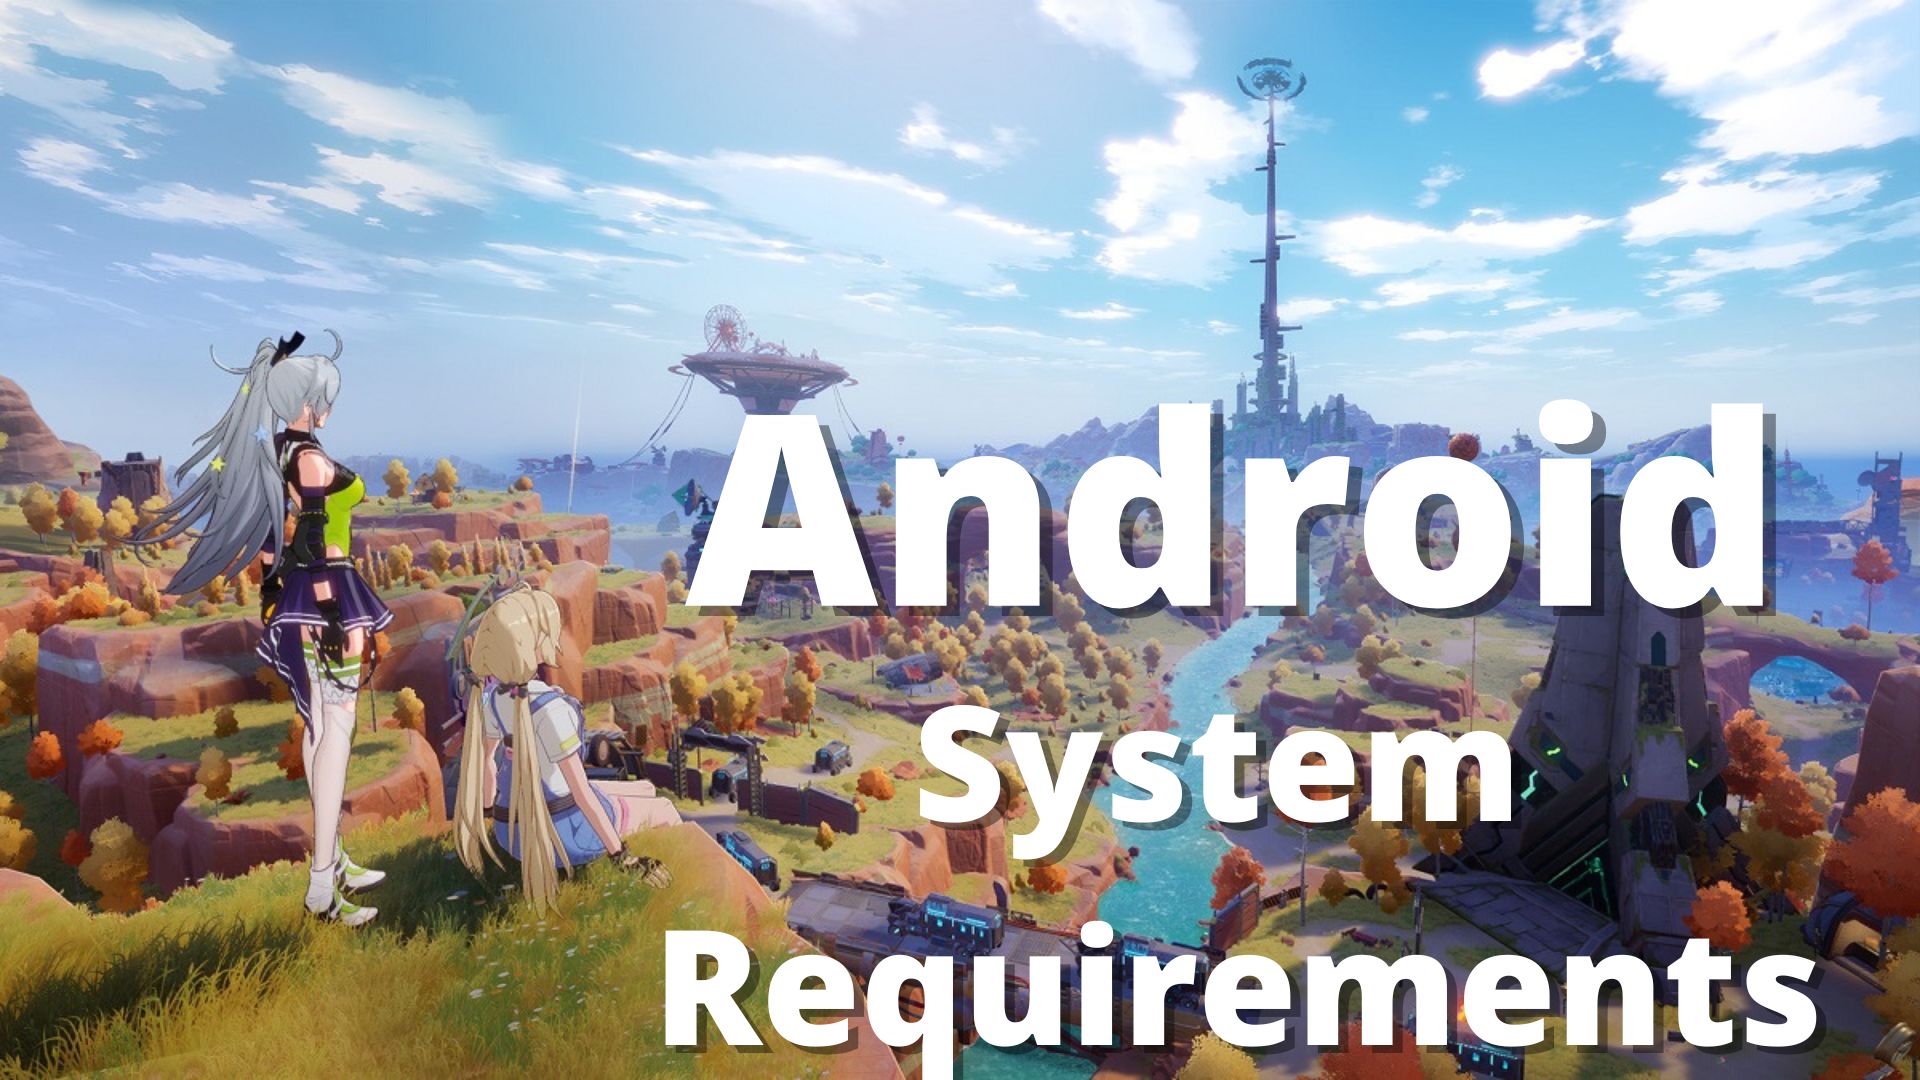 Tower Of Fantasy System Requirements: PC, Android & iOS 